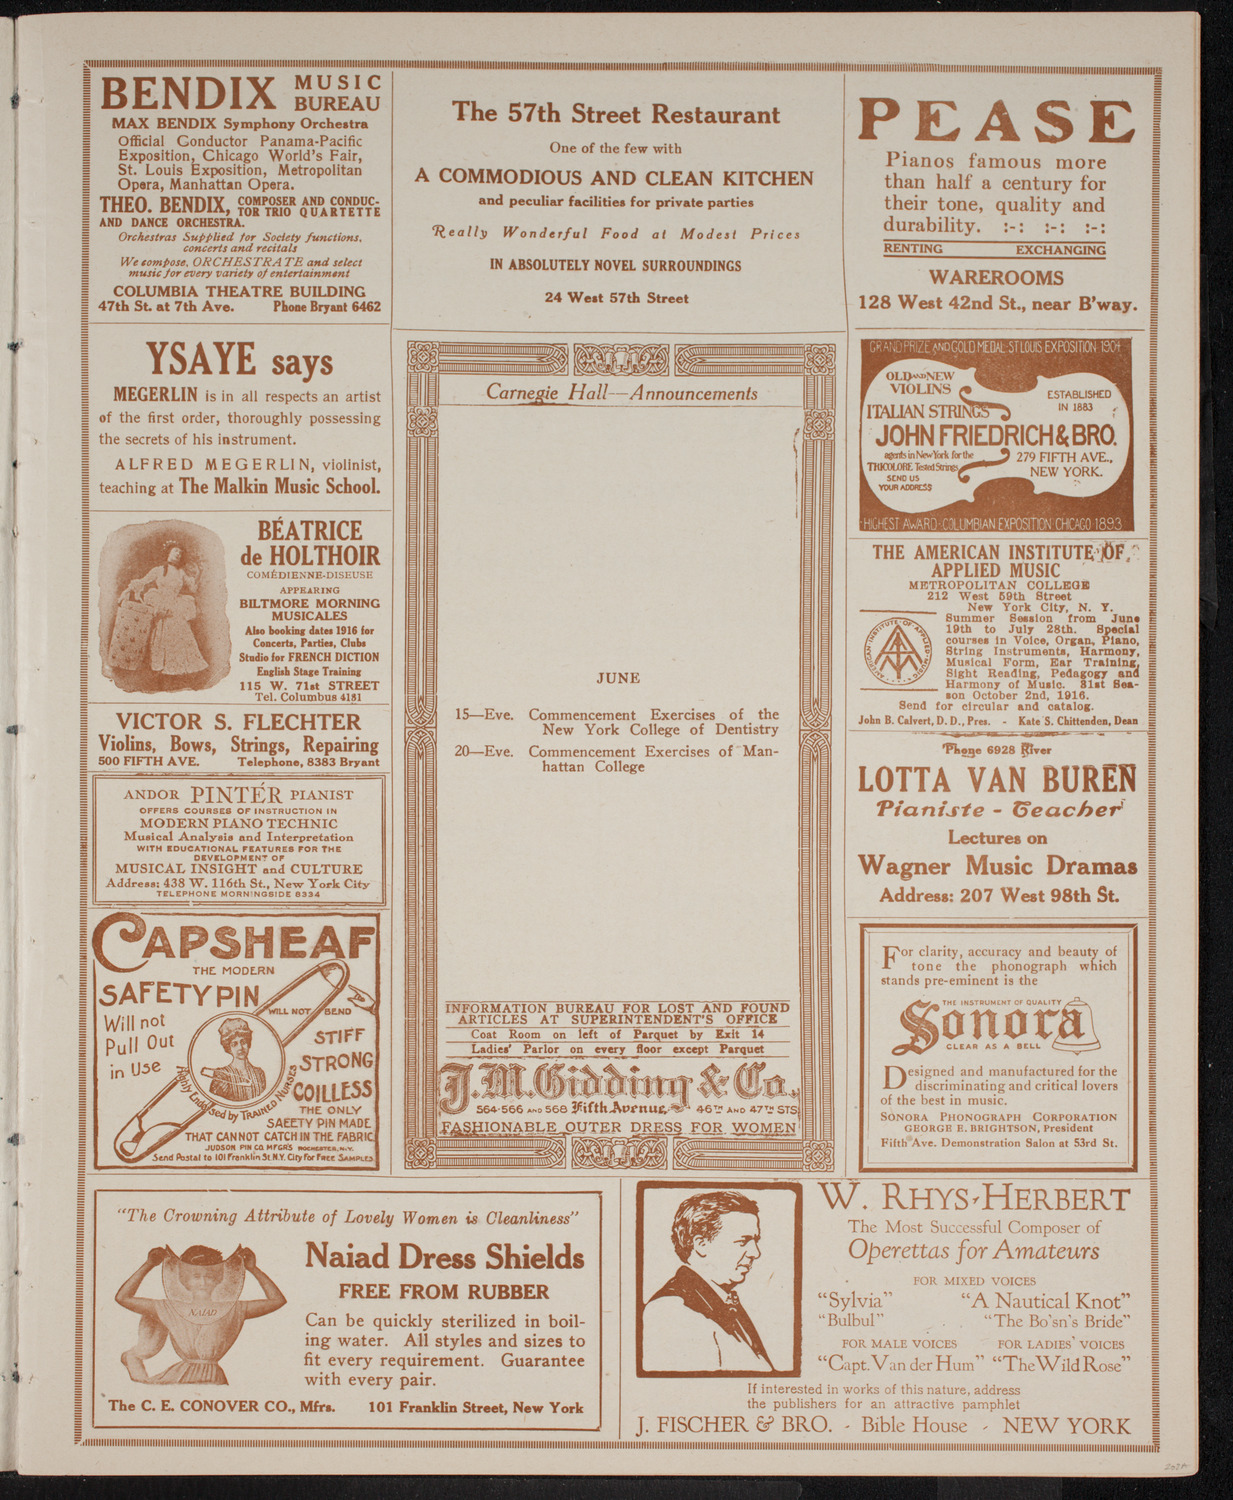 Graduation: College of Dental and Oral Surgery of New York, June 6, 1916, program page 3